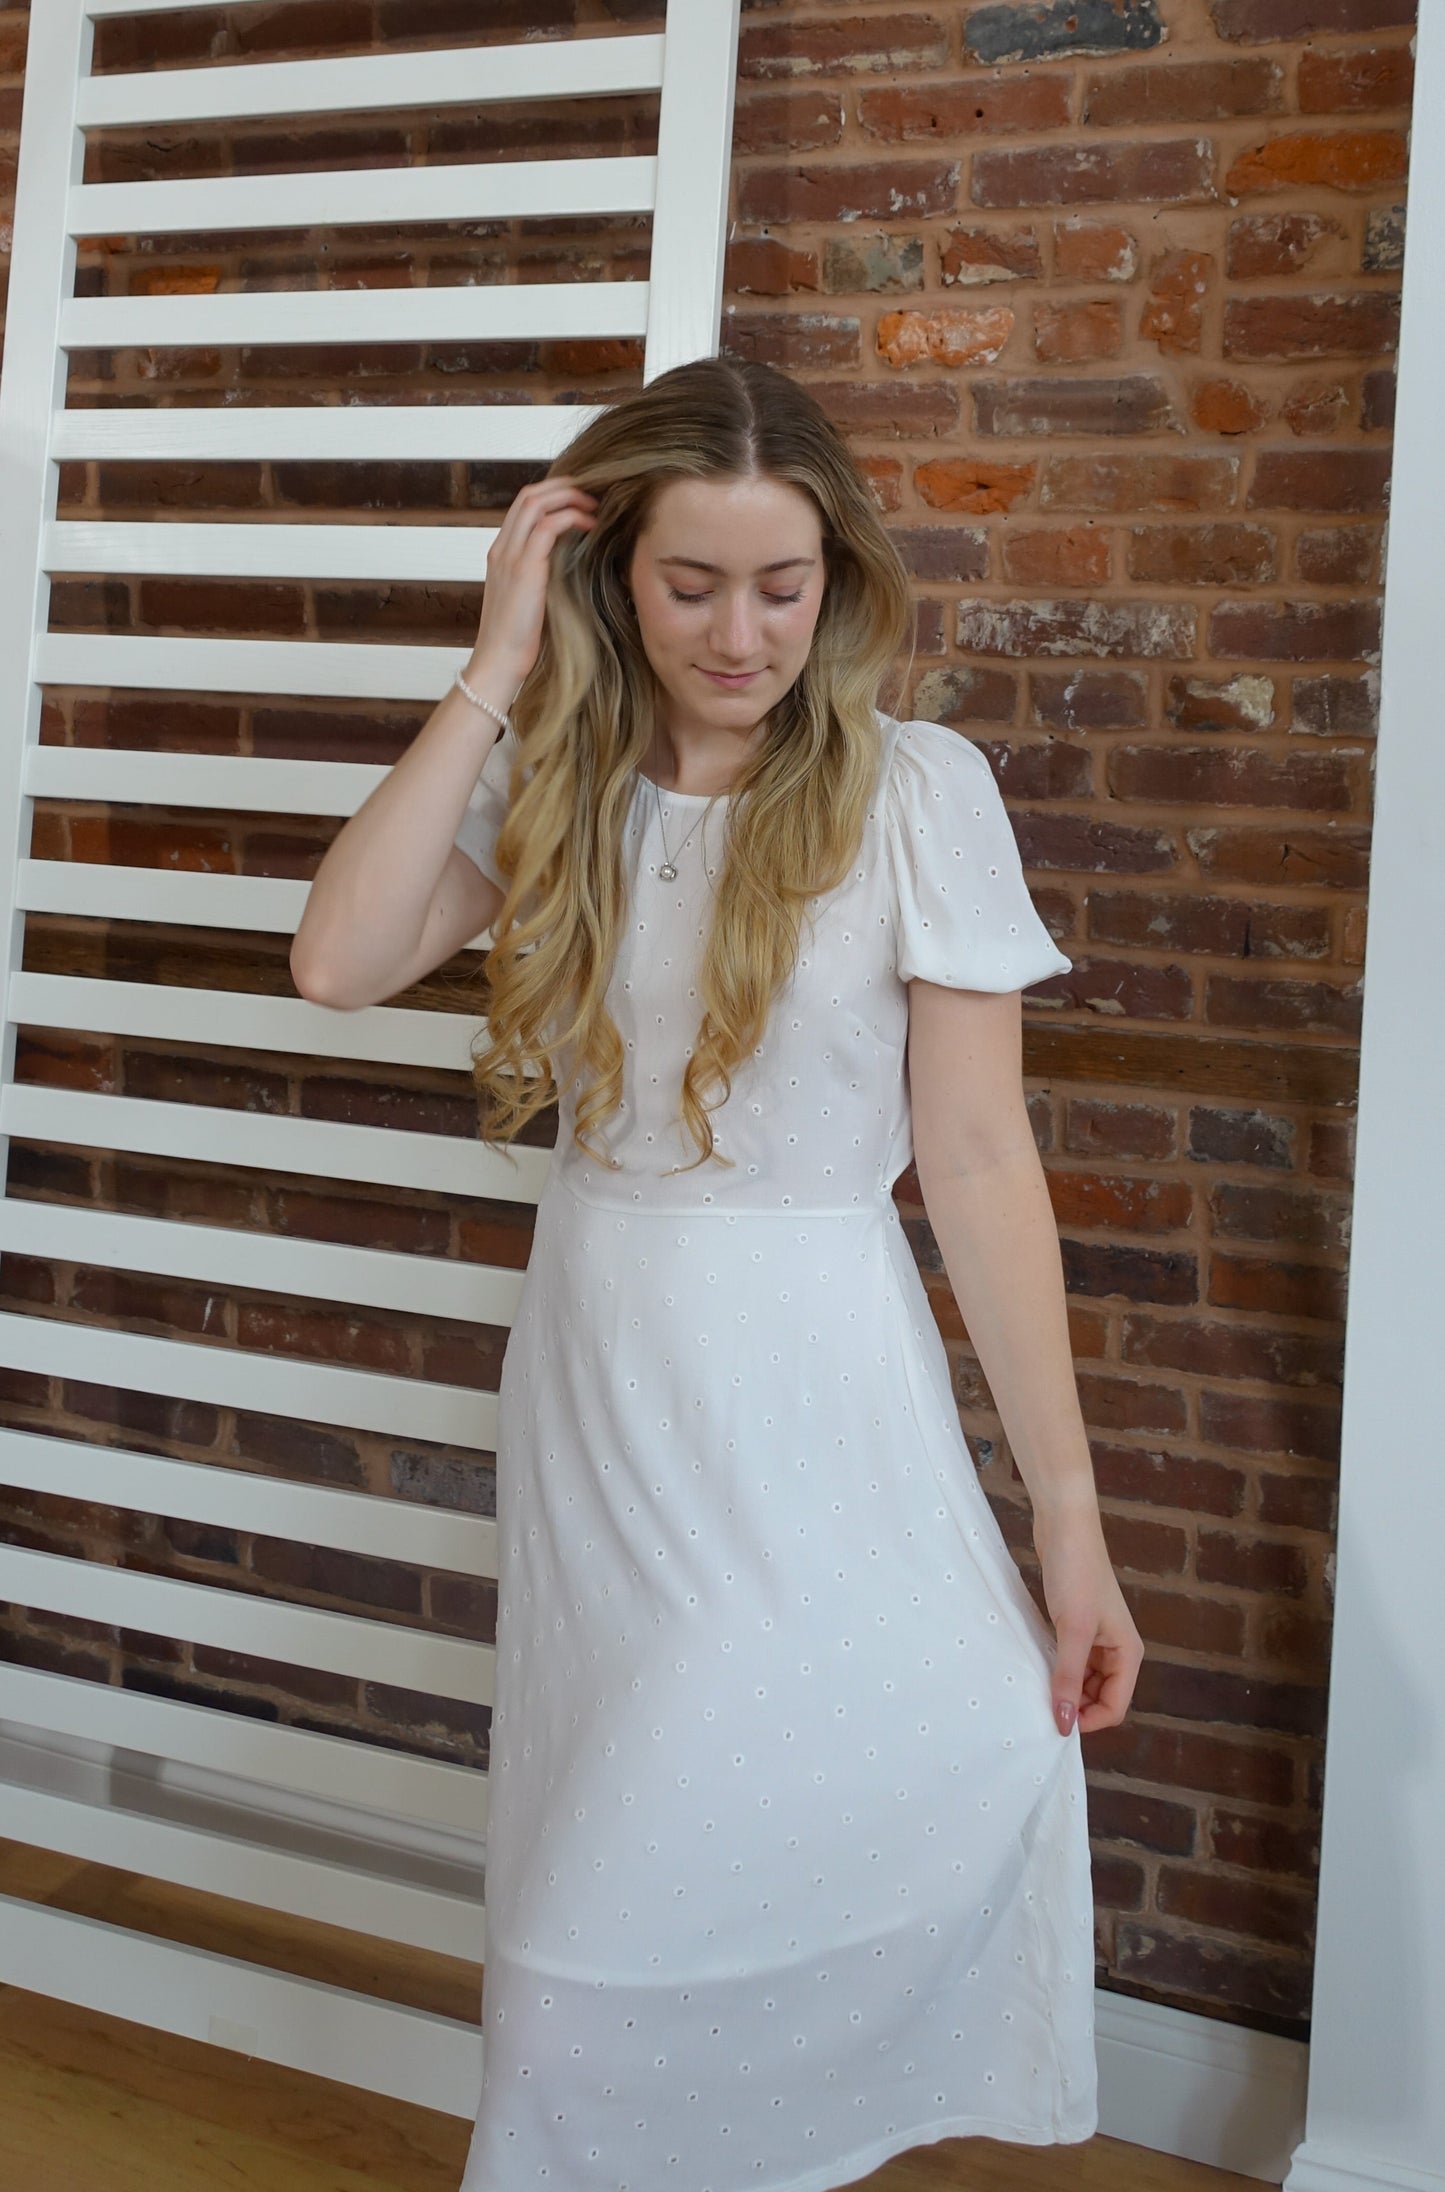 Cotton Embroidered Dress